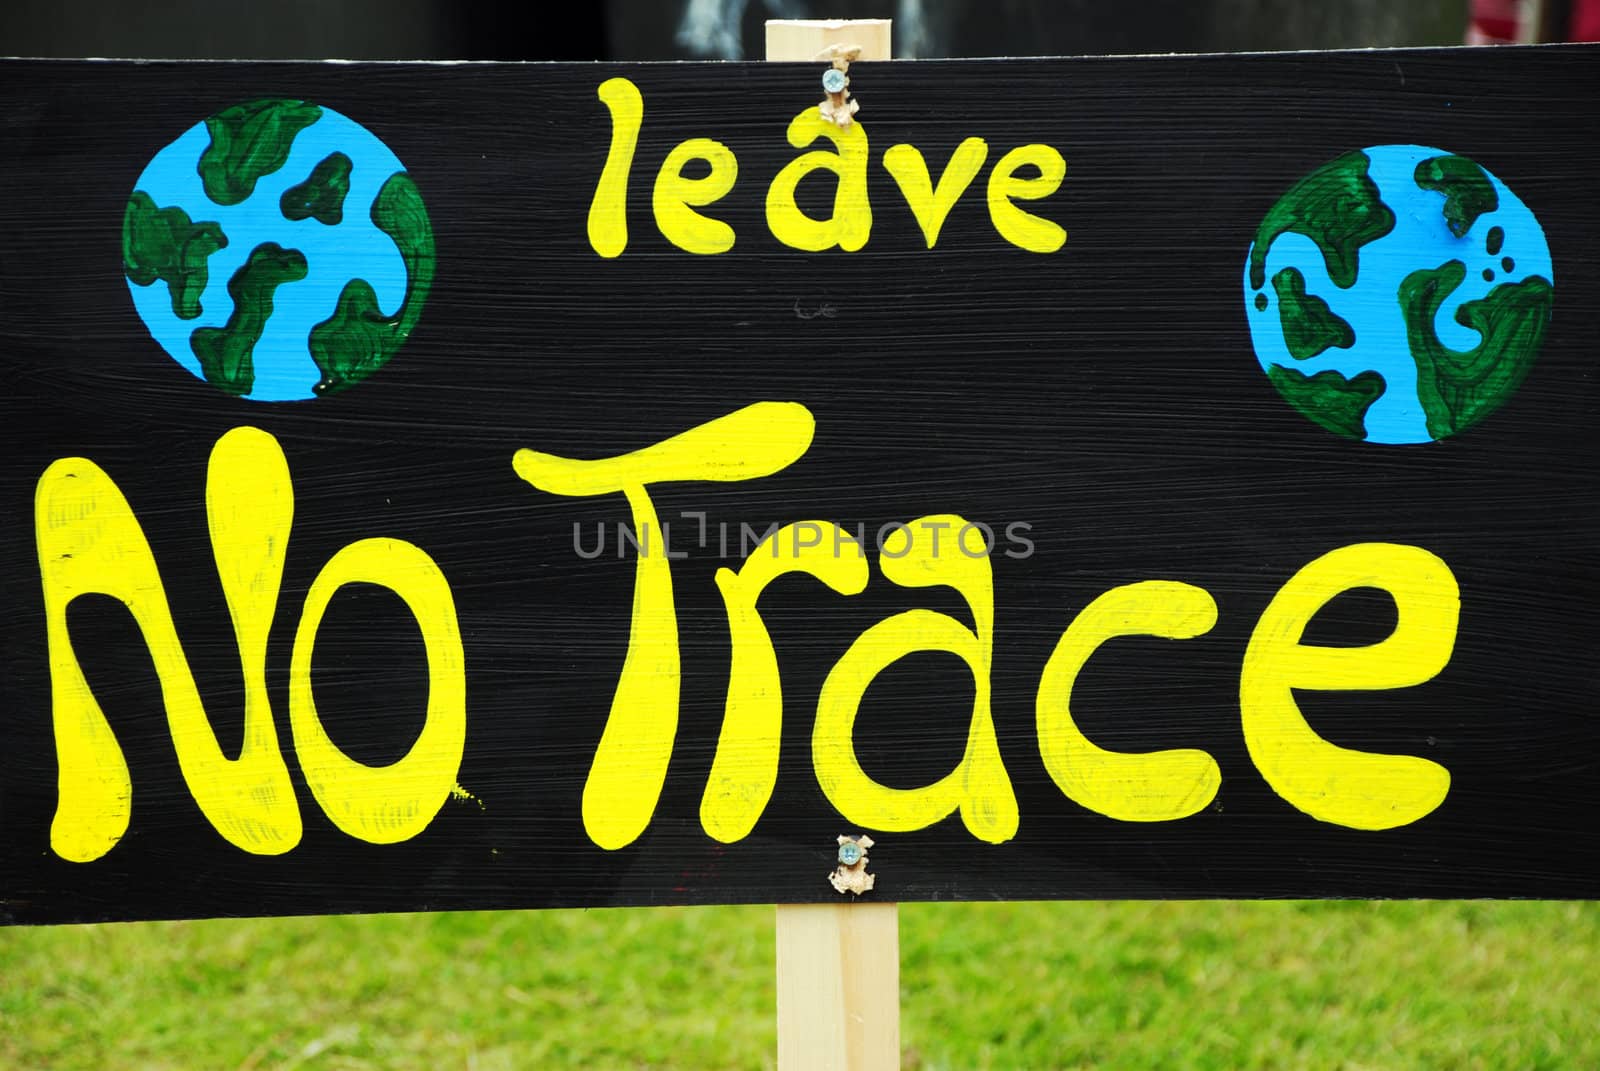 A hand-painted sign reading 'Leave No Trace', as an environmental message against leaving litter